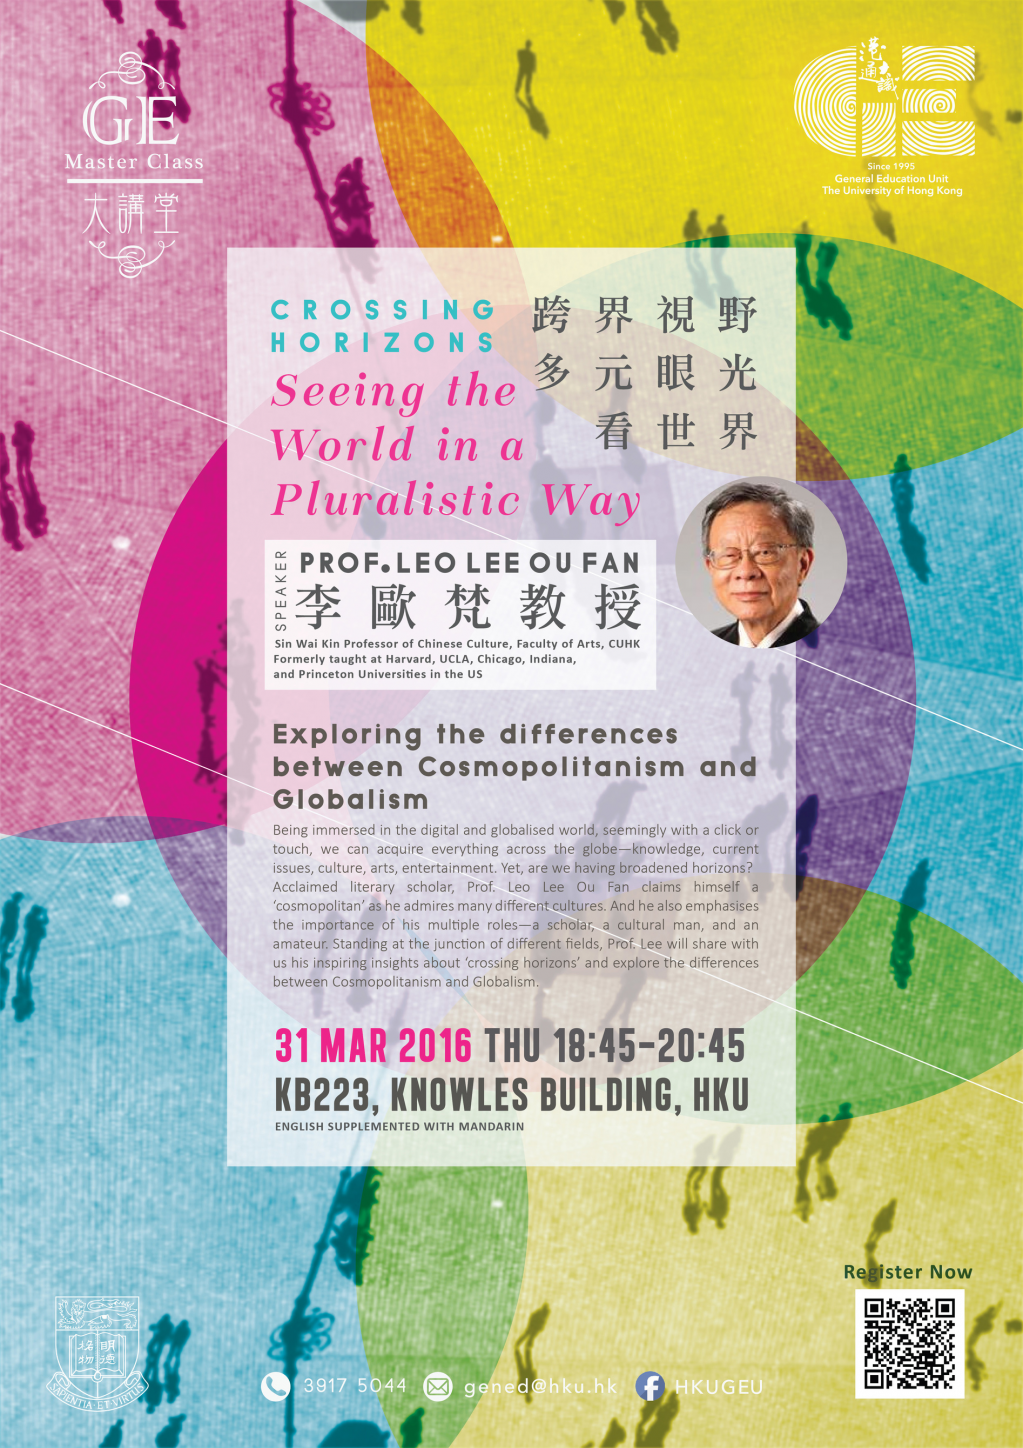 Prof. Leo Lee (李歐梵教授) Crossing Horizons - Seeing the World in a Pluralistic Way